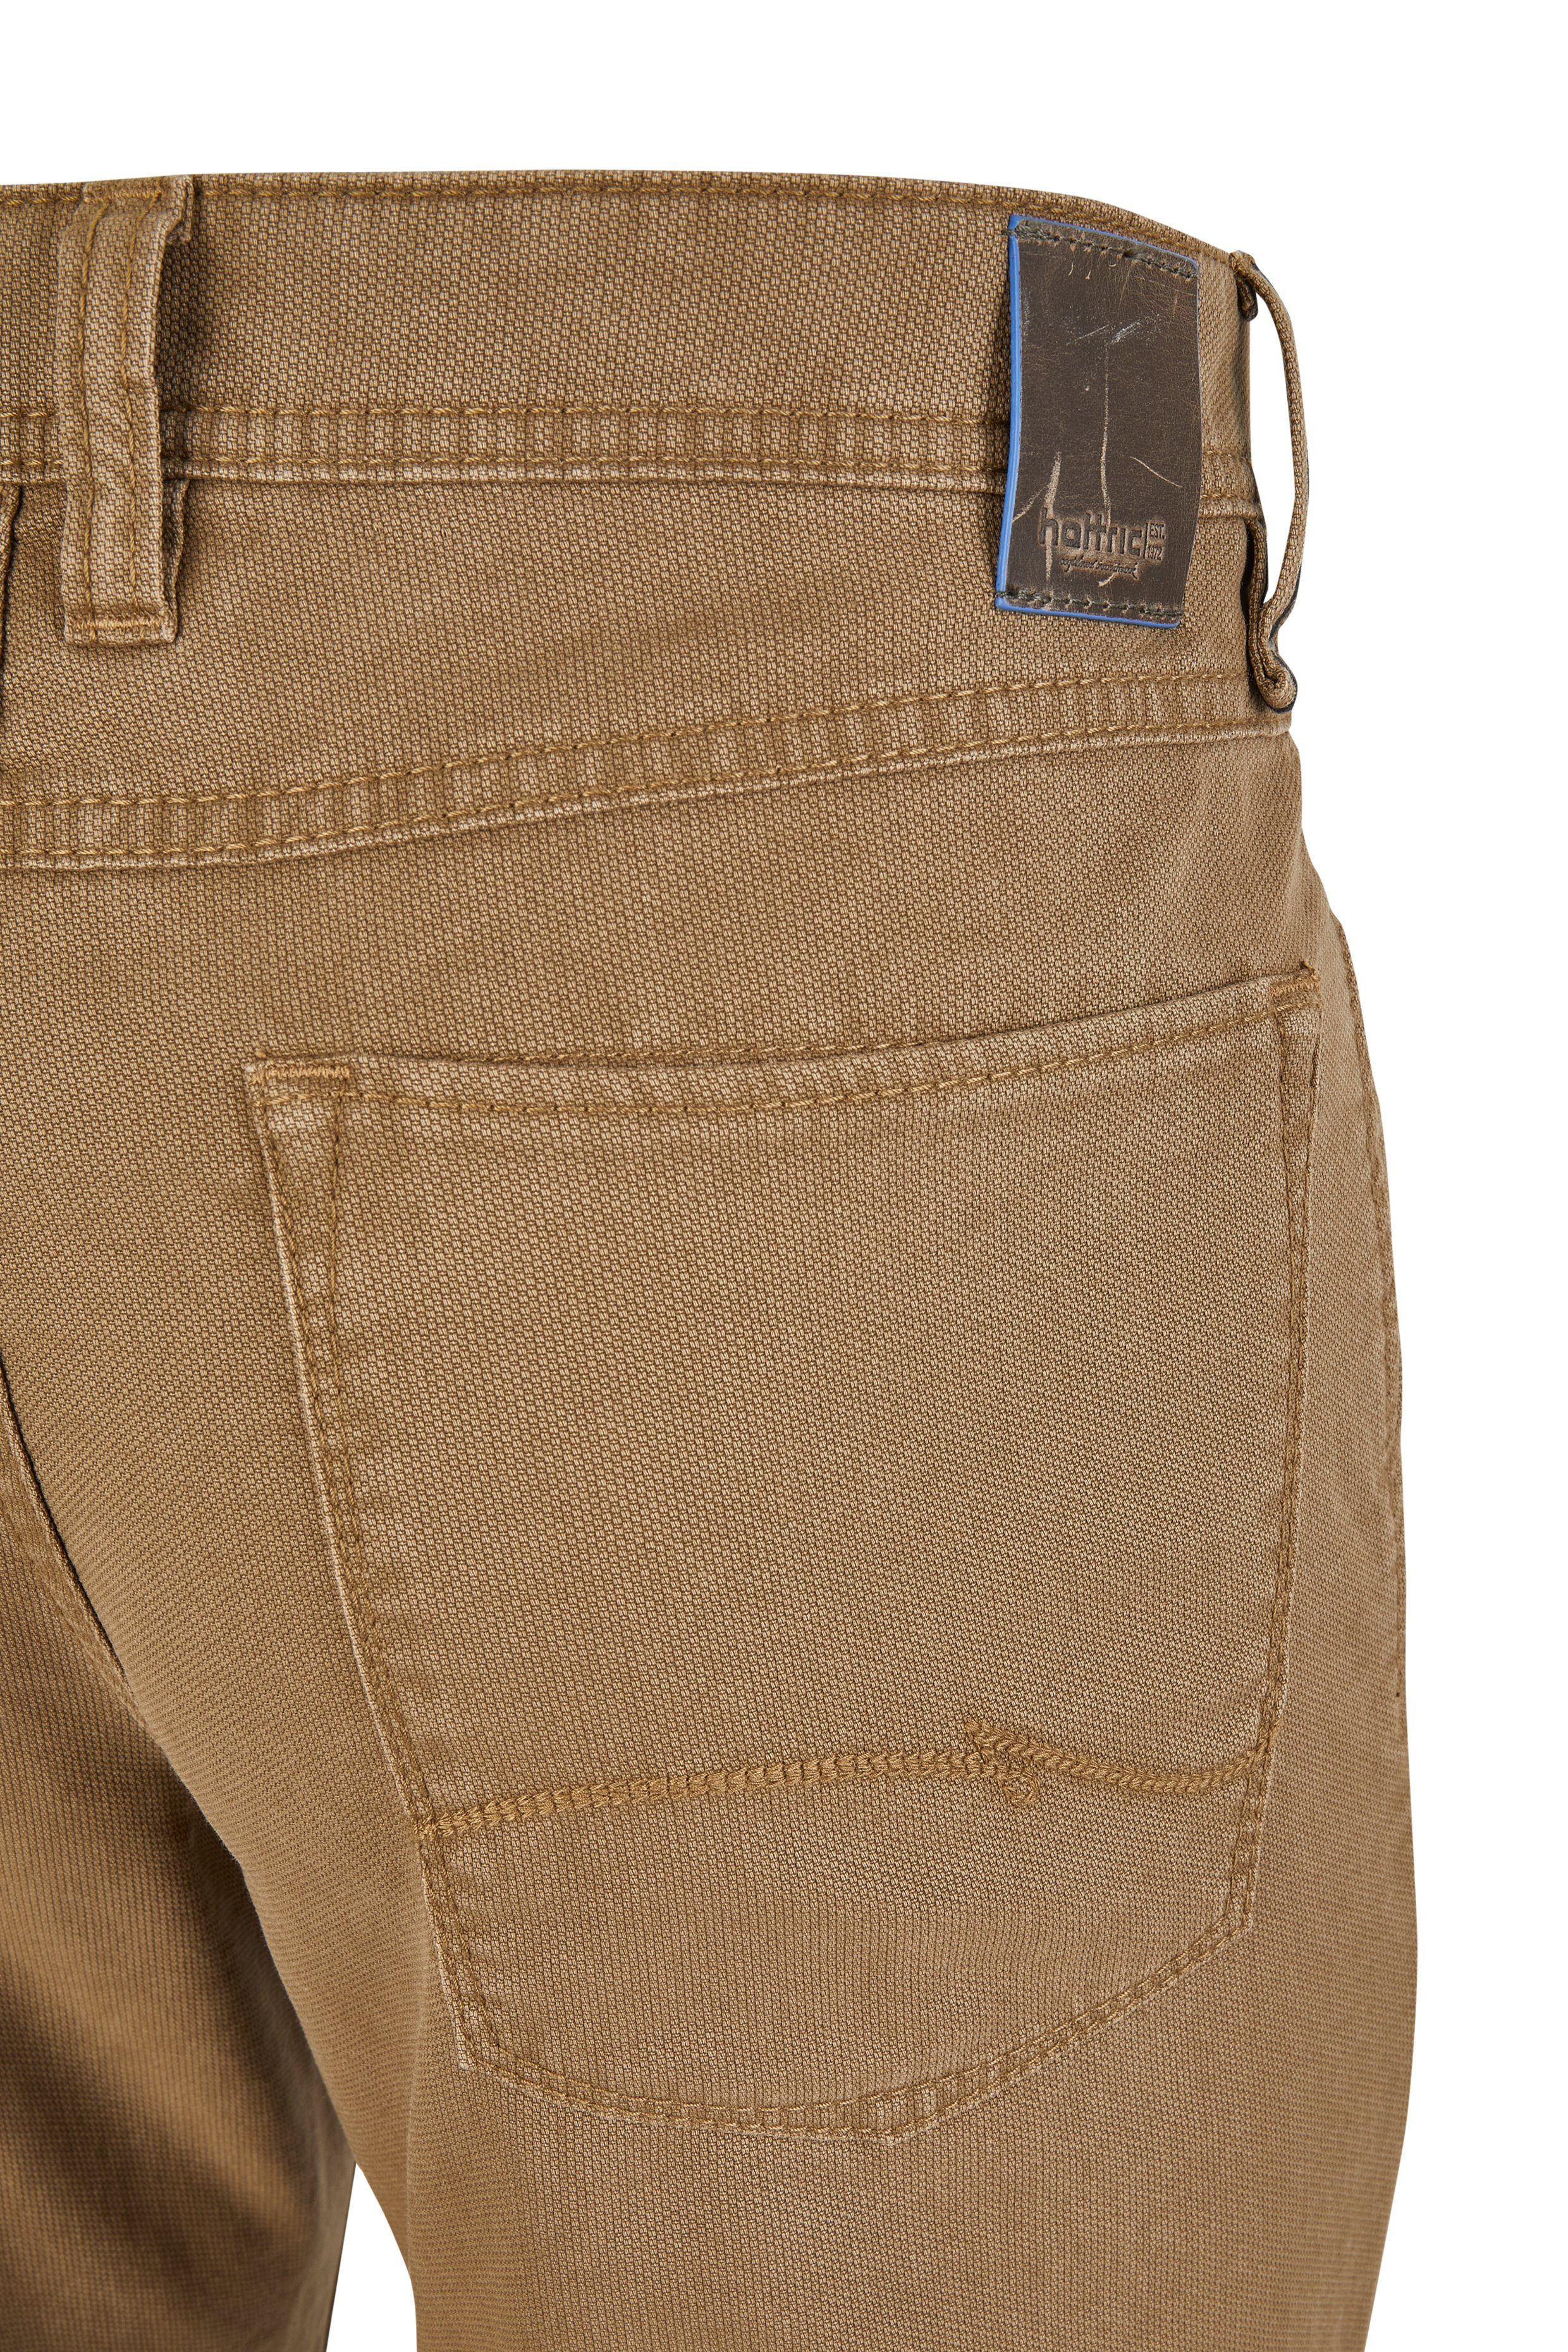 Hattric 5-Pocket-Jeans STRUCTURE COSY 6334.18 beige HUNTER - HATTRIC 688955